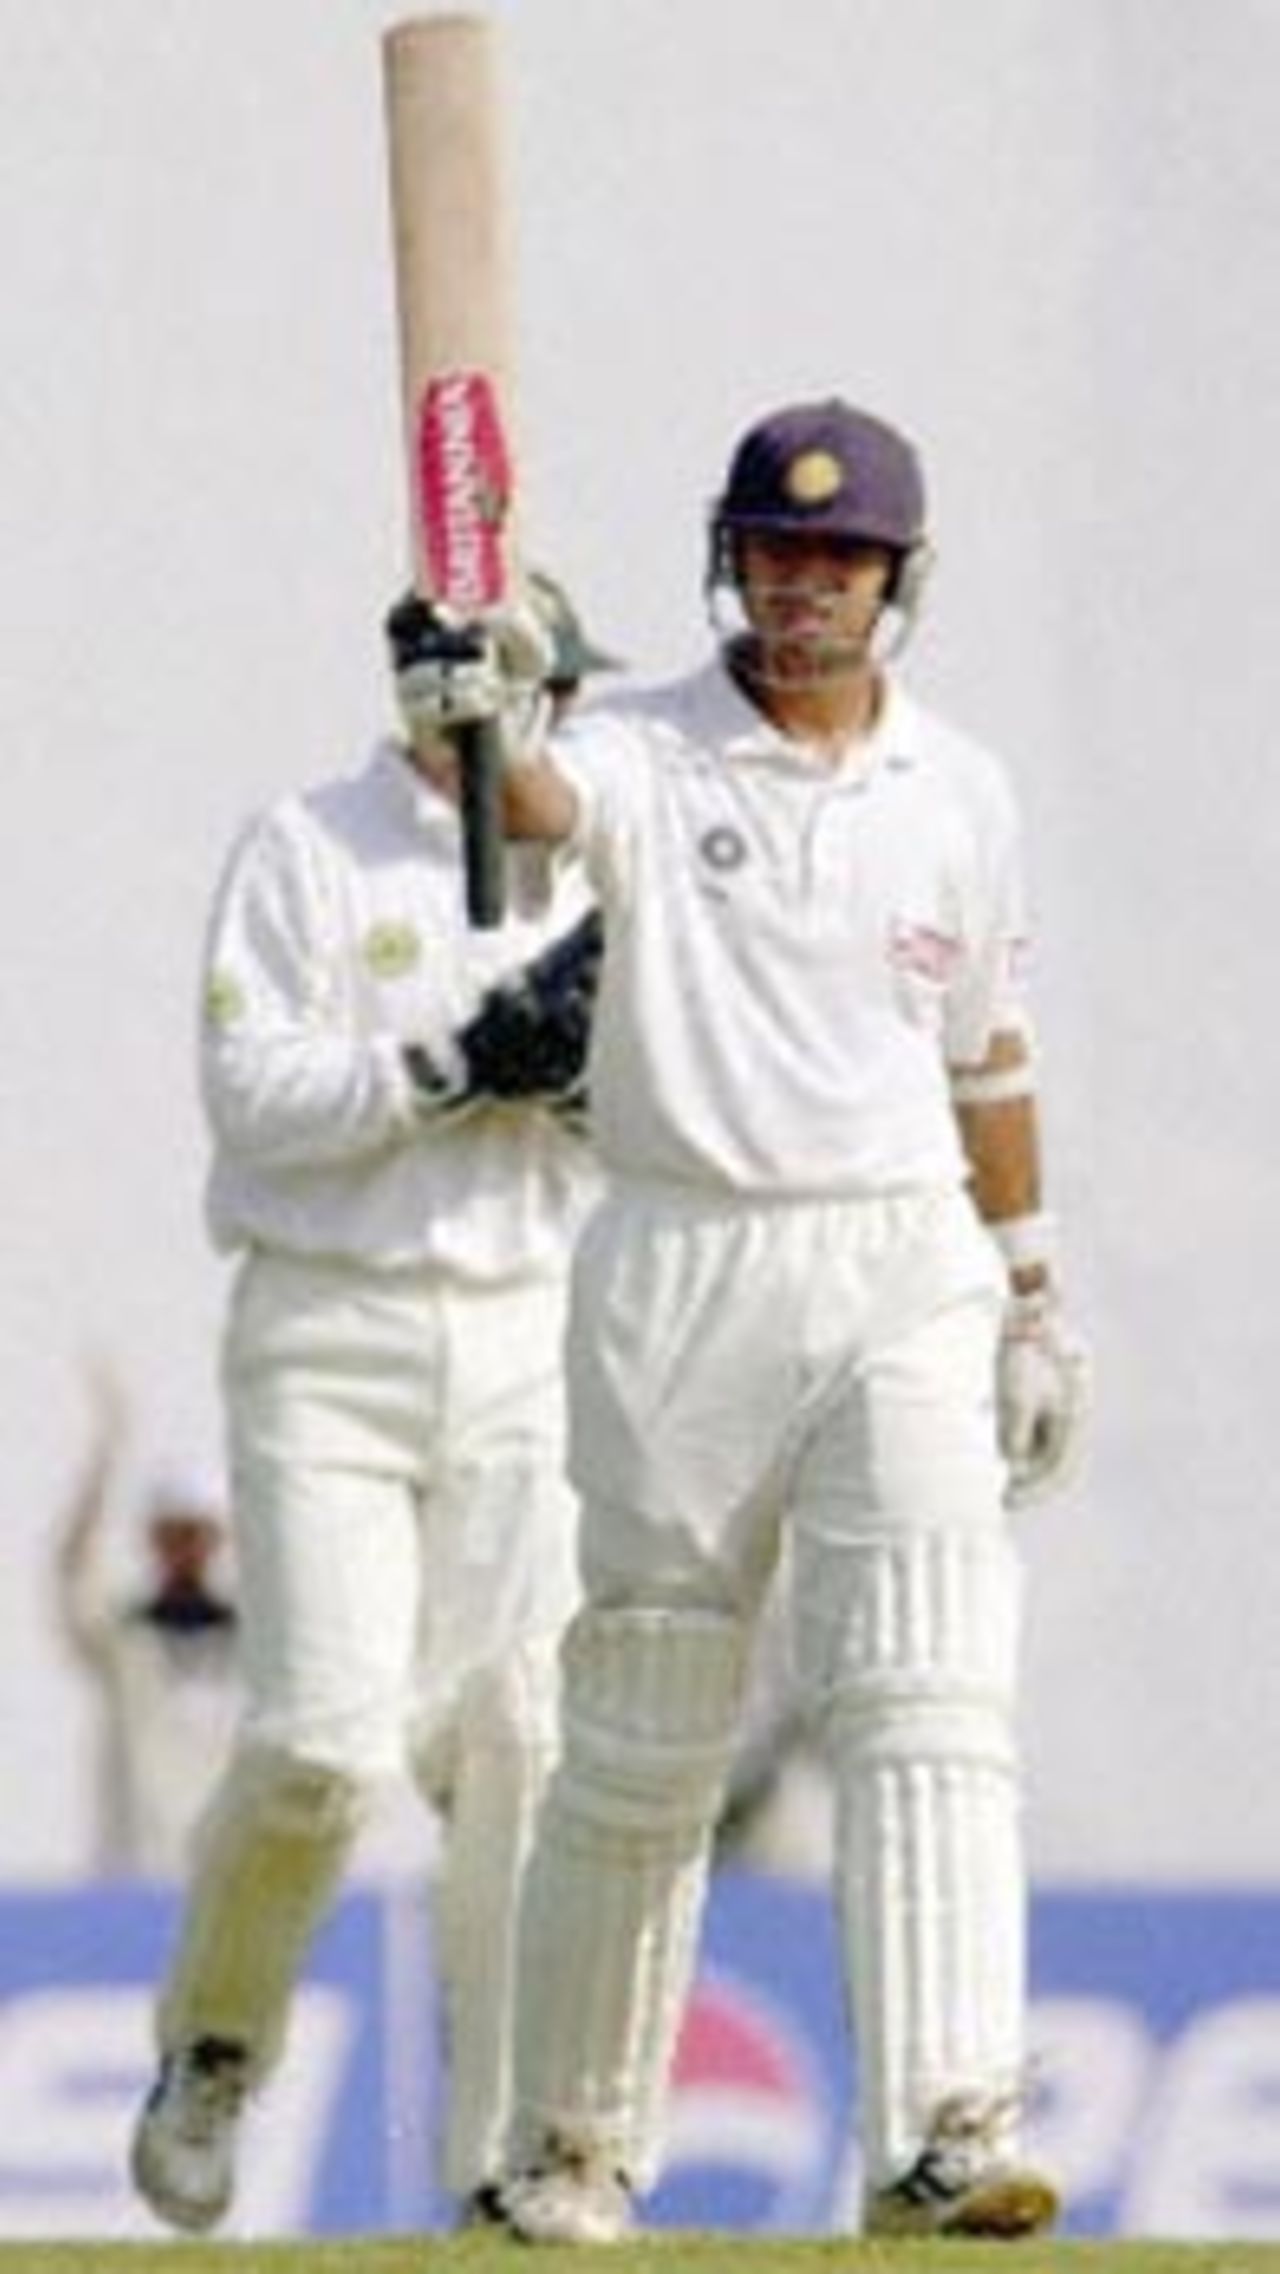 Indian batsman Rahul Dravid raises his bat to acknolwedge the cheering crowd after completing his century as Zimbabwe wicket keeper Andy Flower (behind) looks on, during the second day of the second test match between India and Zimbabwe 26 November 2000 in Nagpur. Dravid was unbeaten on 153 runs as India stood at 463 for two by lunch. India is already 1-0 up in the two-test-series against Zimbabwe.